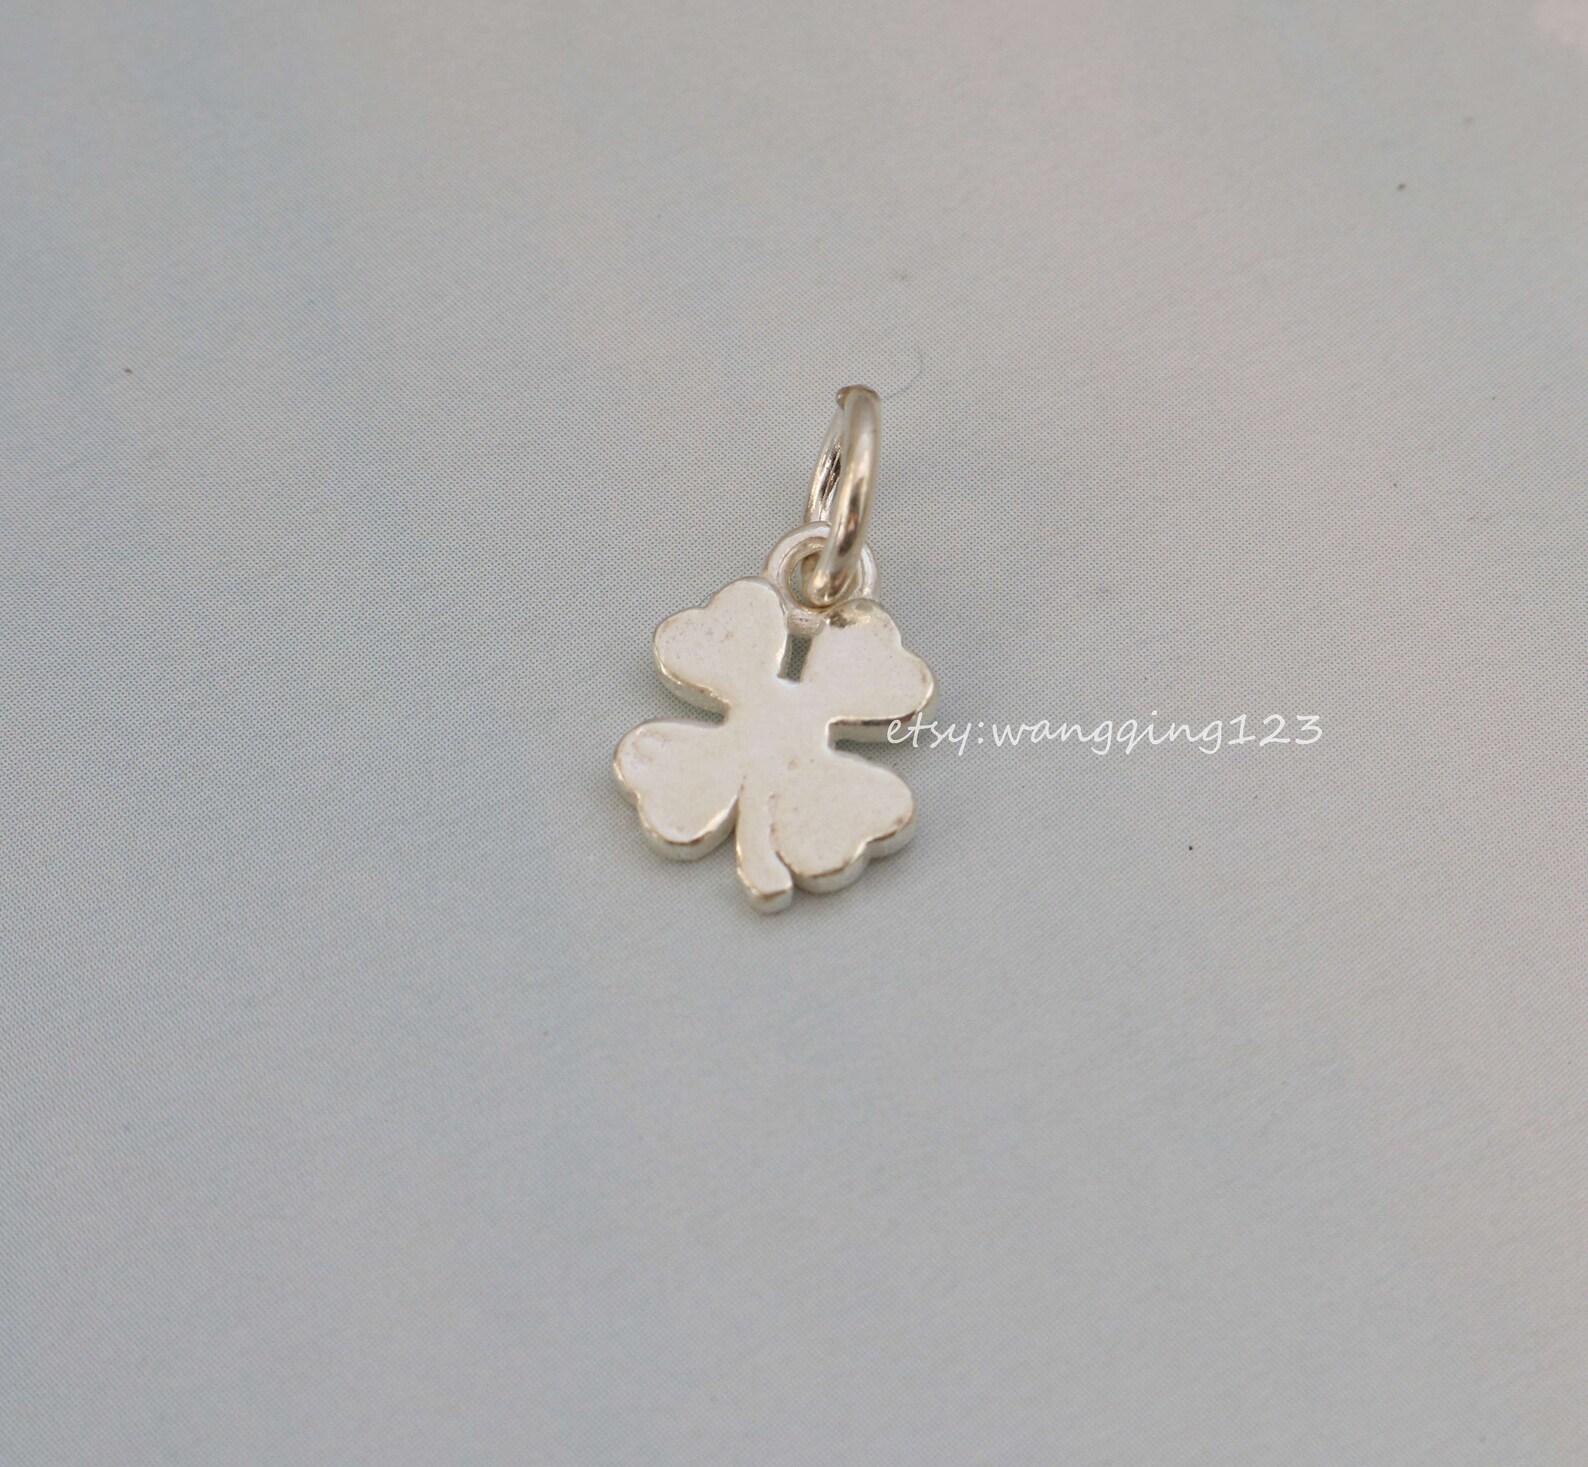 Solid 925 sterling silver clover charm pendant 79mm | Etsy